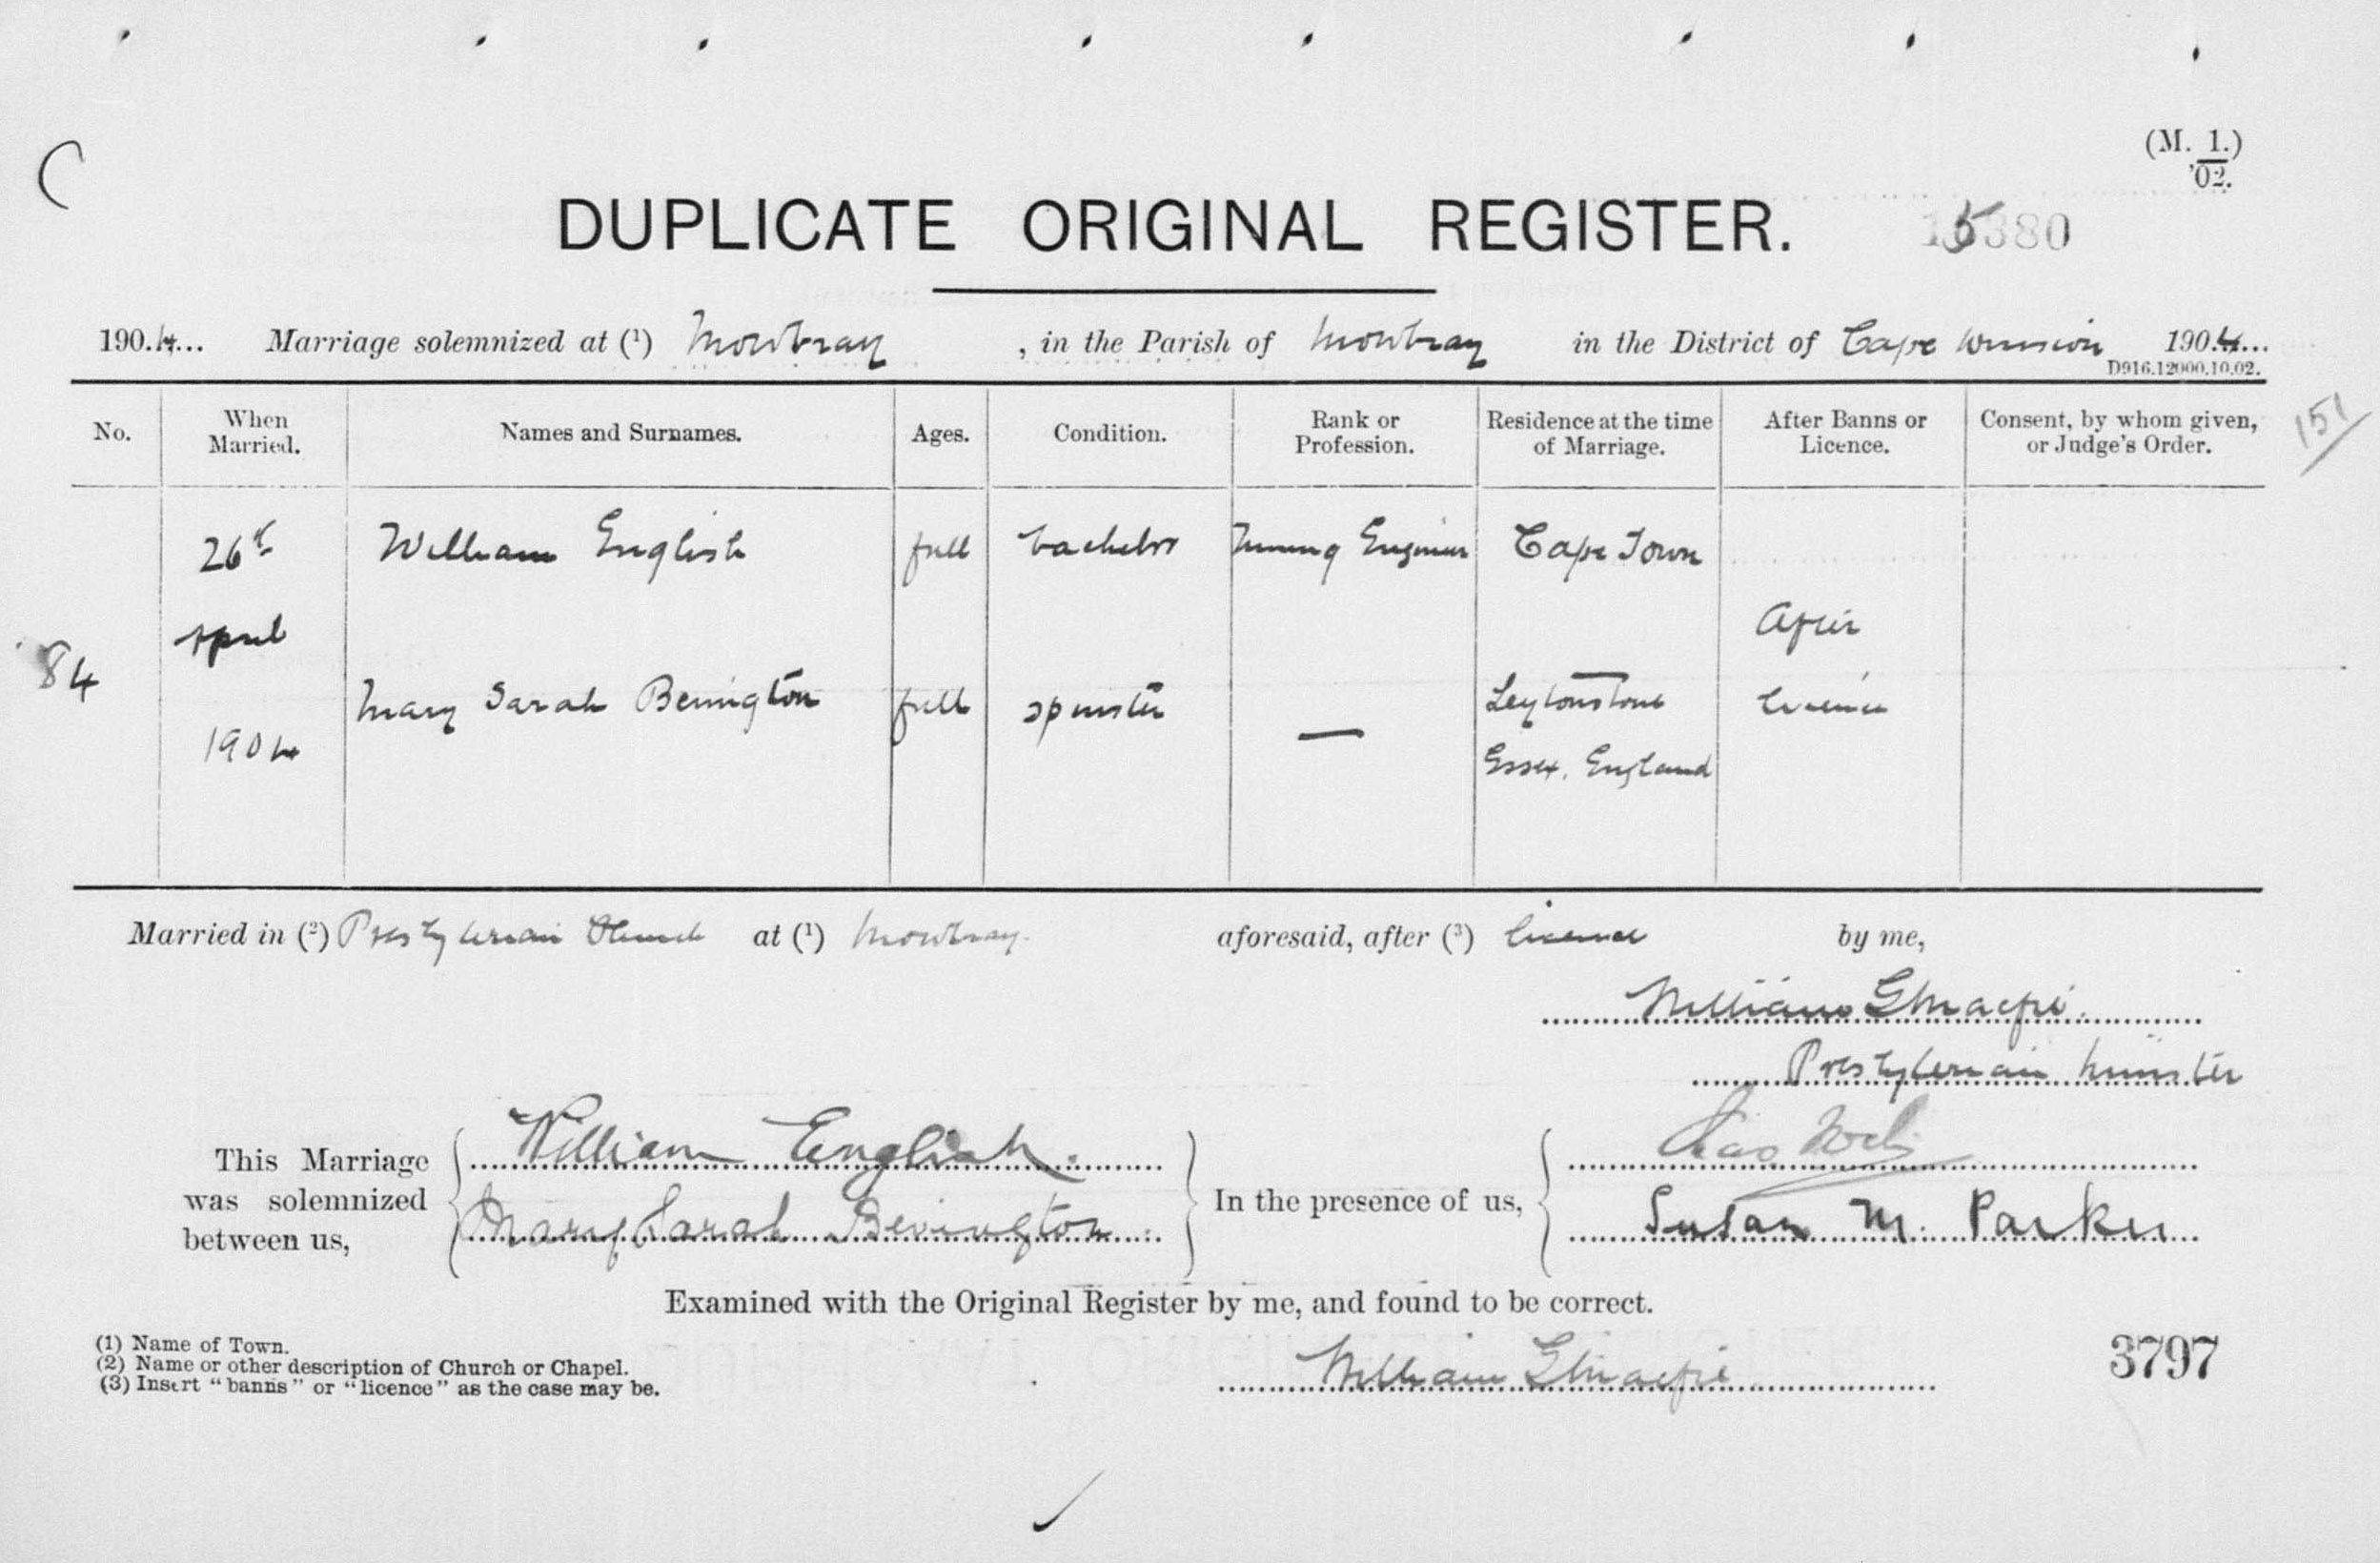 William English and and Mary Sarah Bevington's marriage certificate.